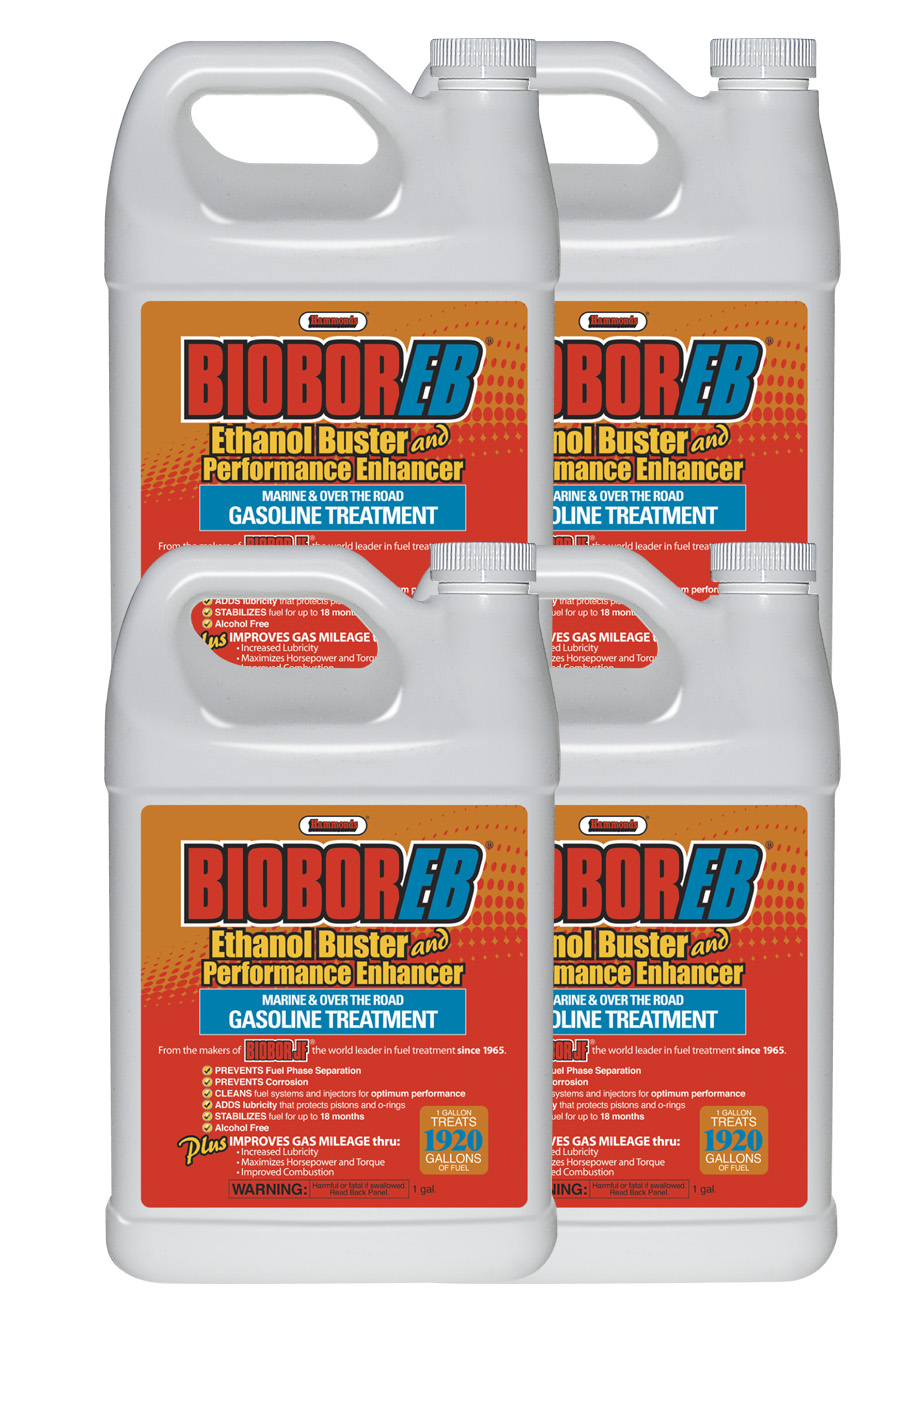 Biobor EB 1 gal. (4 Pack) - Ethanol Buster and Performance Enhancer Image